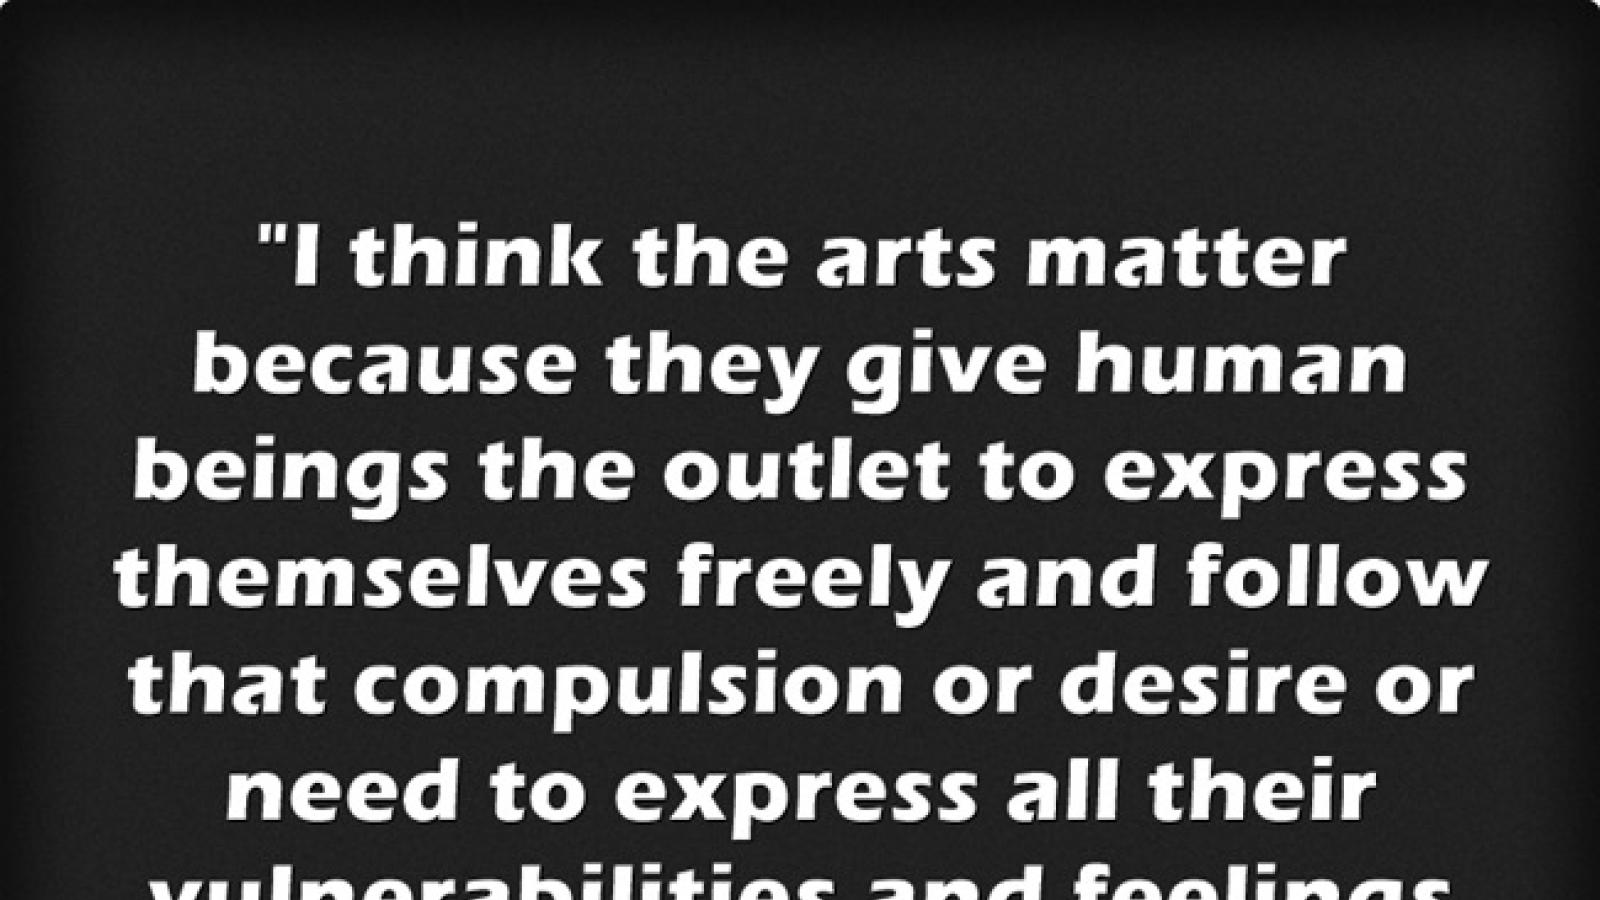 "The arts matter because they give human beings the outlet to express themsevles freely...." -- Marc Maron